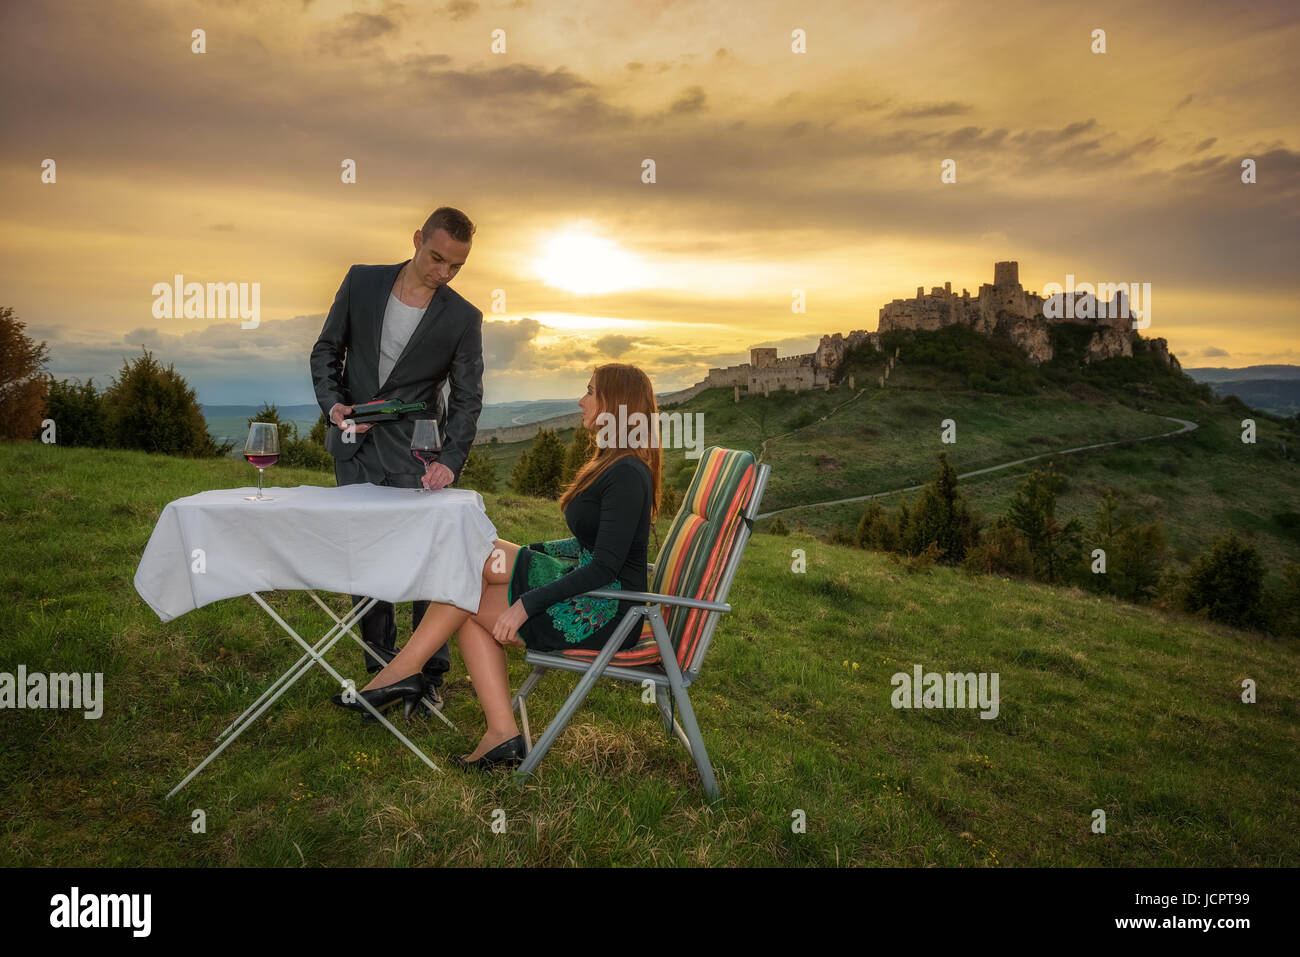 Couple in love drink red wine in nature under the ruins of a castle at sunset. Stock Photo